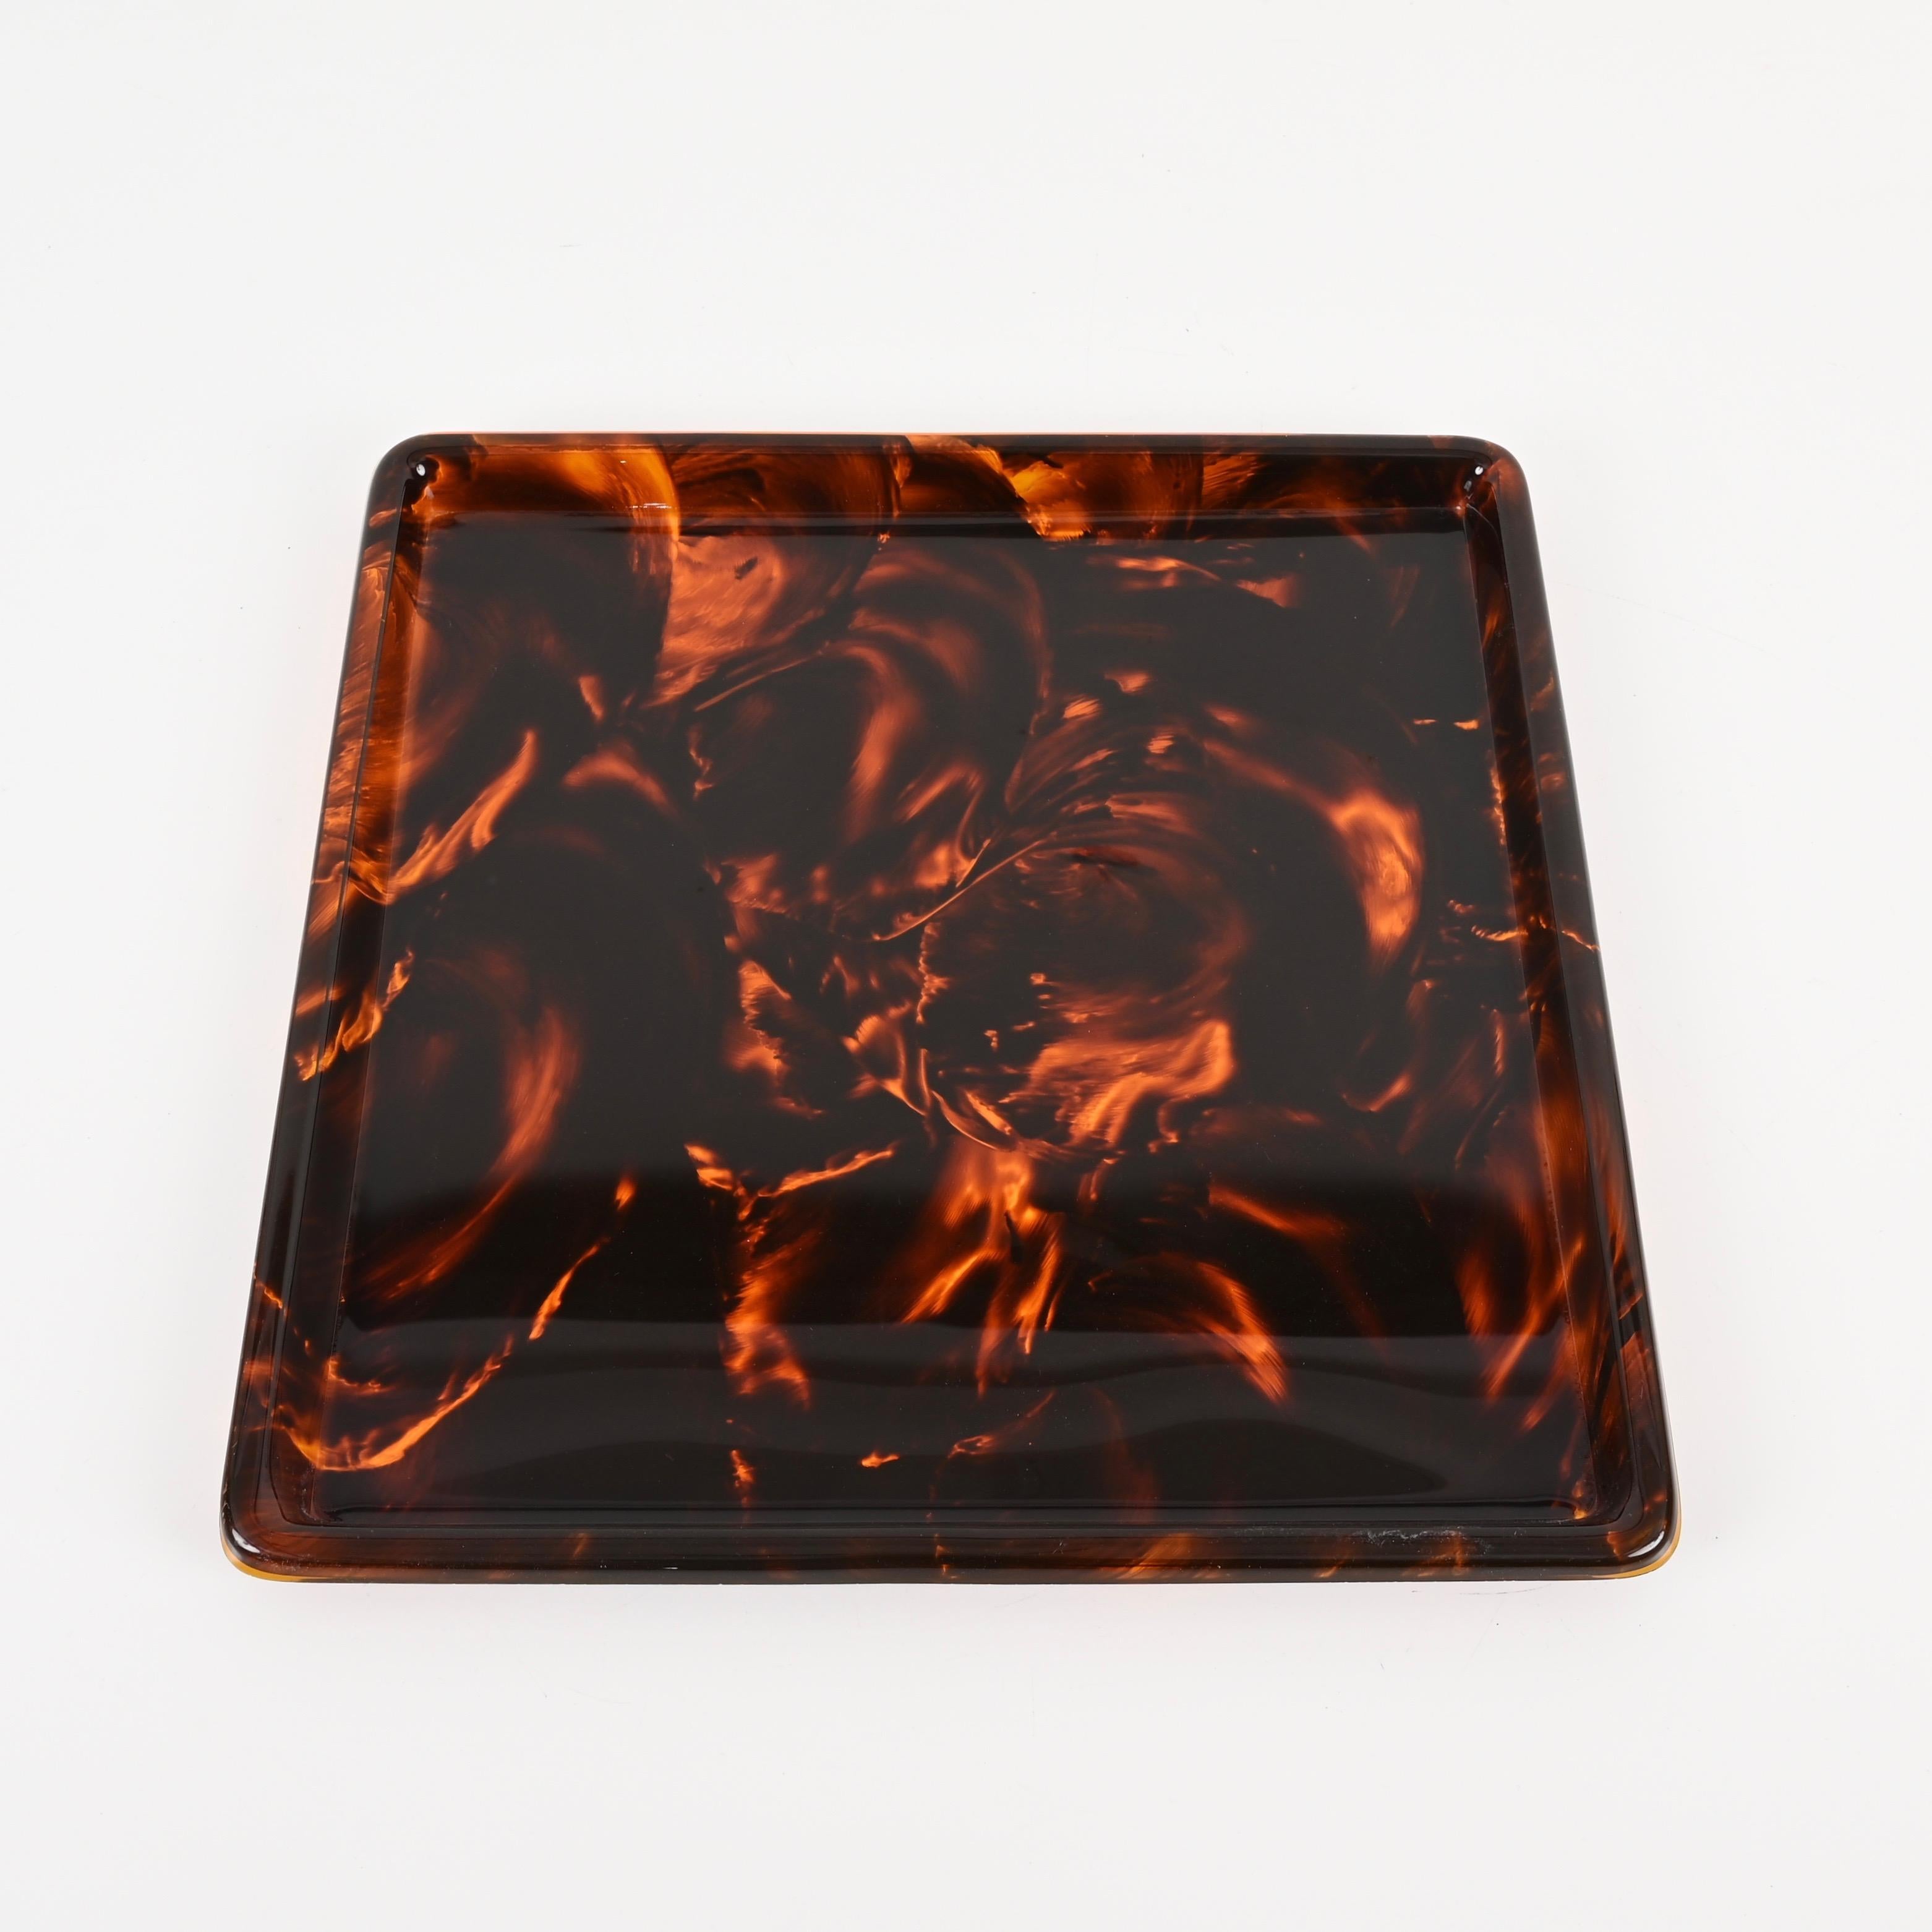 Christian Dior Square Tortoiseshell Effect Lucite Serving Tray, Italy 1970s For Sale 3